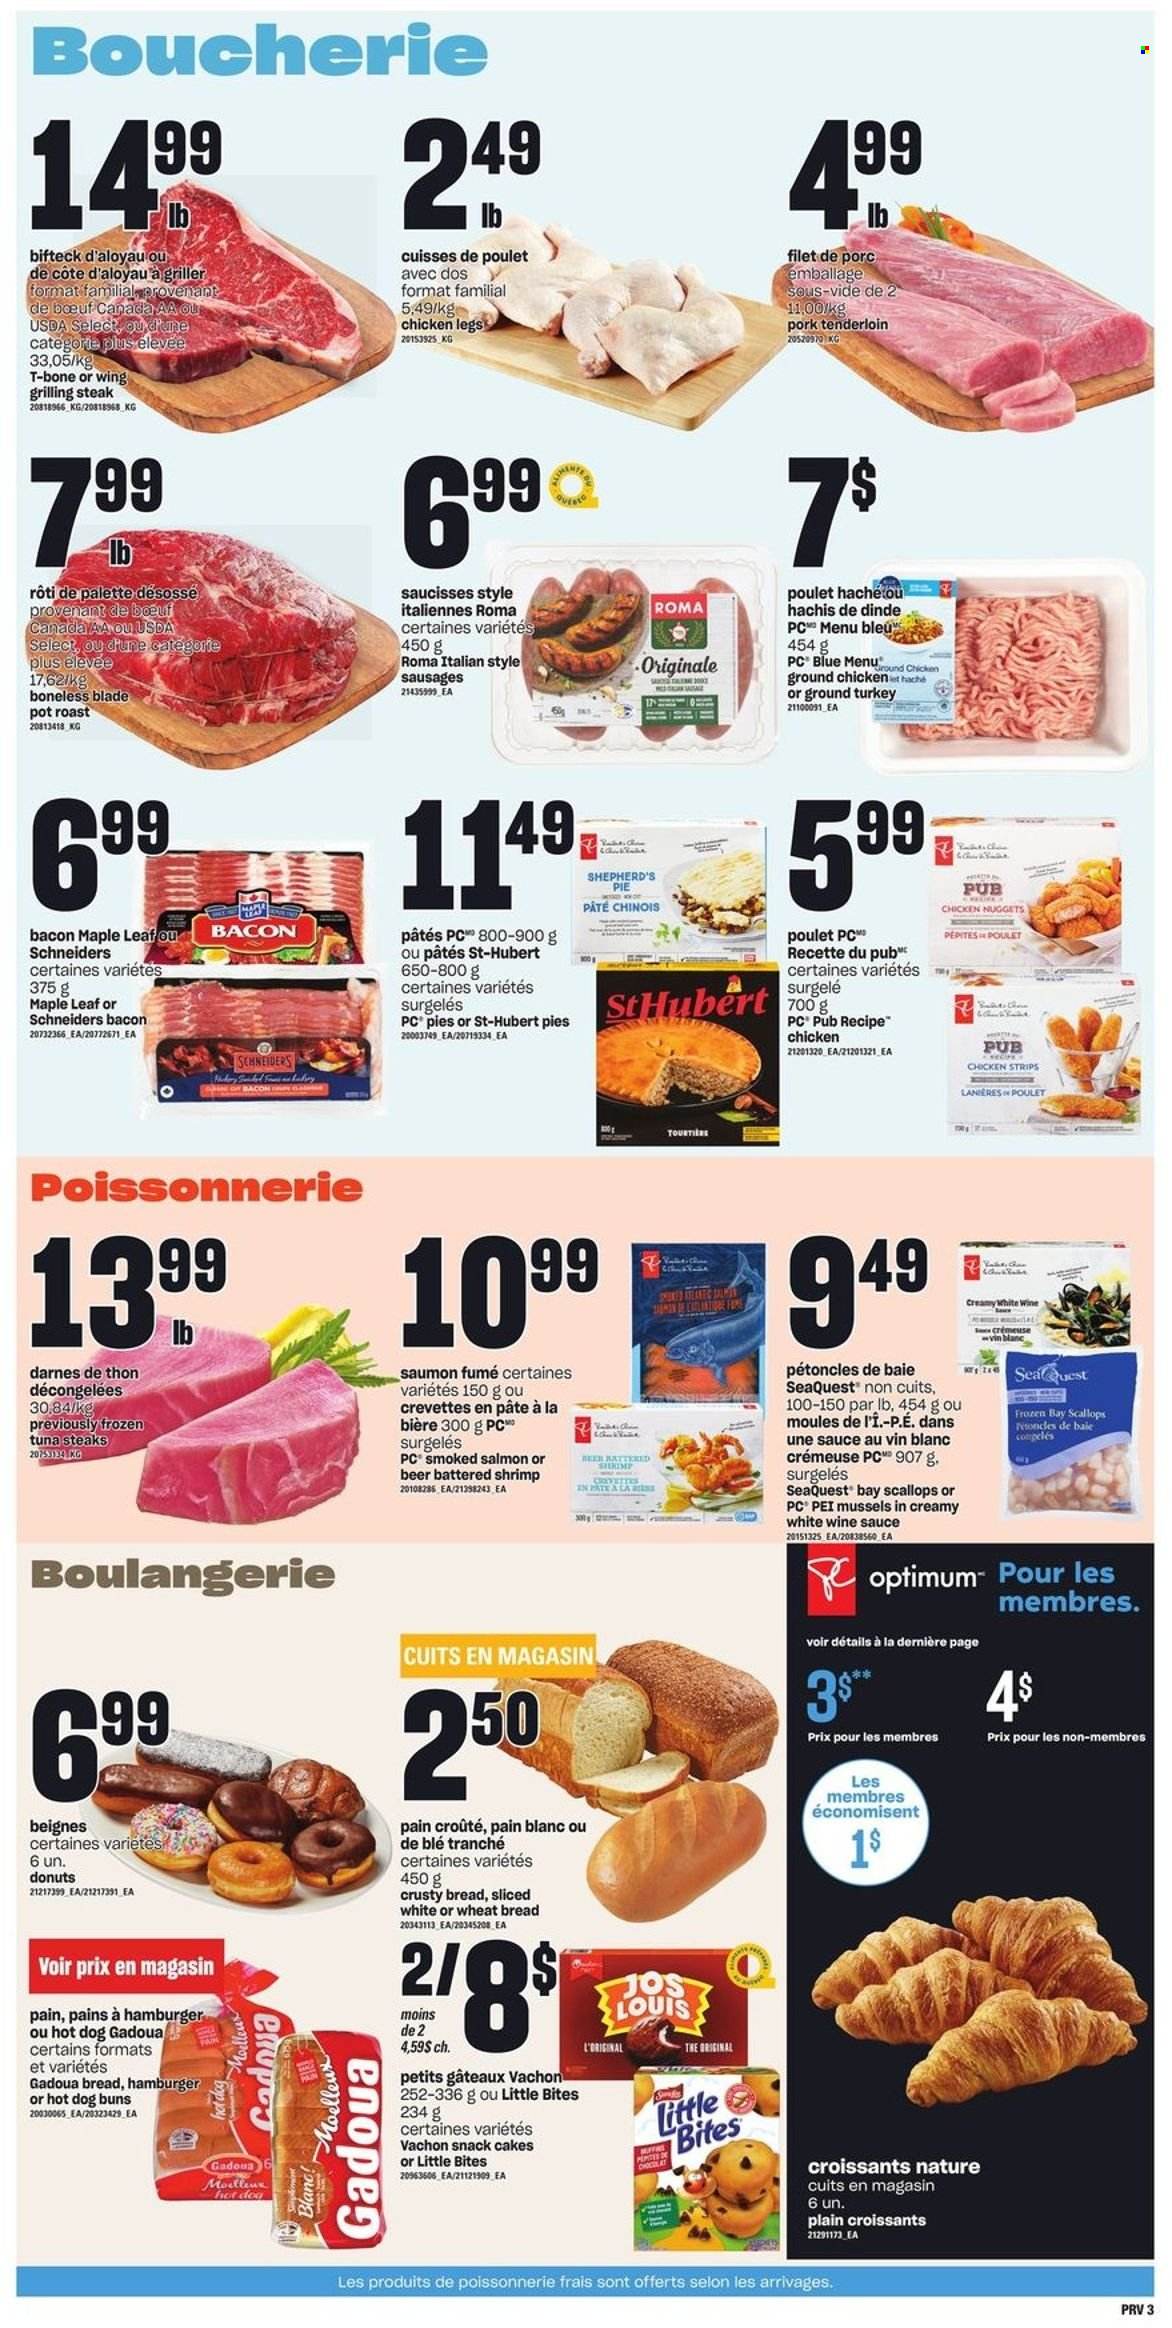 thumbnail - Provigo Flyer - January 26, 2023 - February 01, 2023 - Sales products - wheat bread, cake, croissant, buns, donut, mussels, salmon, scallops, smoked salmon, tuna, shrimps, nuggets, sauce, chicken nuggets, bacon, sausage, strips, chicken strips, snack, Little Bites, beer, ground chicken, ground turkey, chicken legs, chicken, turkey, beef meat, t-bone steak, pork meat, pork tenderloin, Palette, Optimum, steak. Page 4.